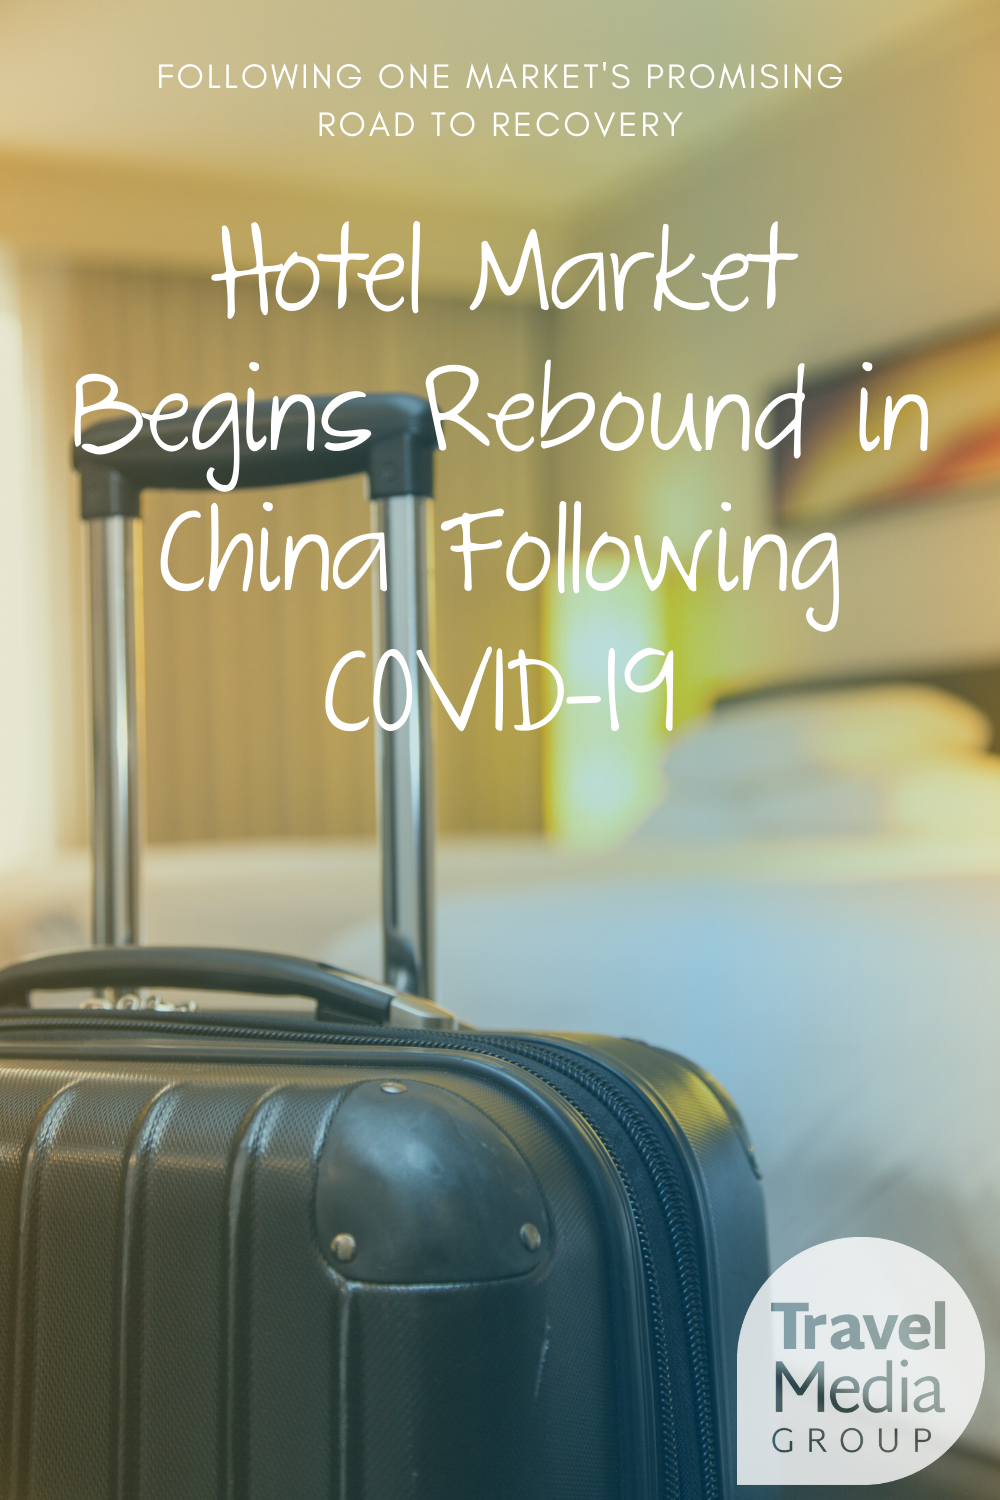 With uncertainty on the rise in North America, we look to Chinese market to get a glimpse at the future for the hotel industry stateside.